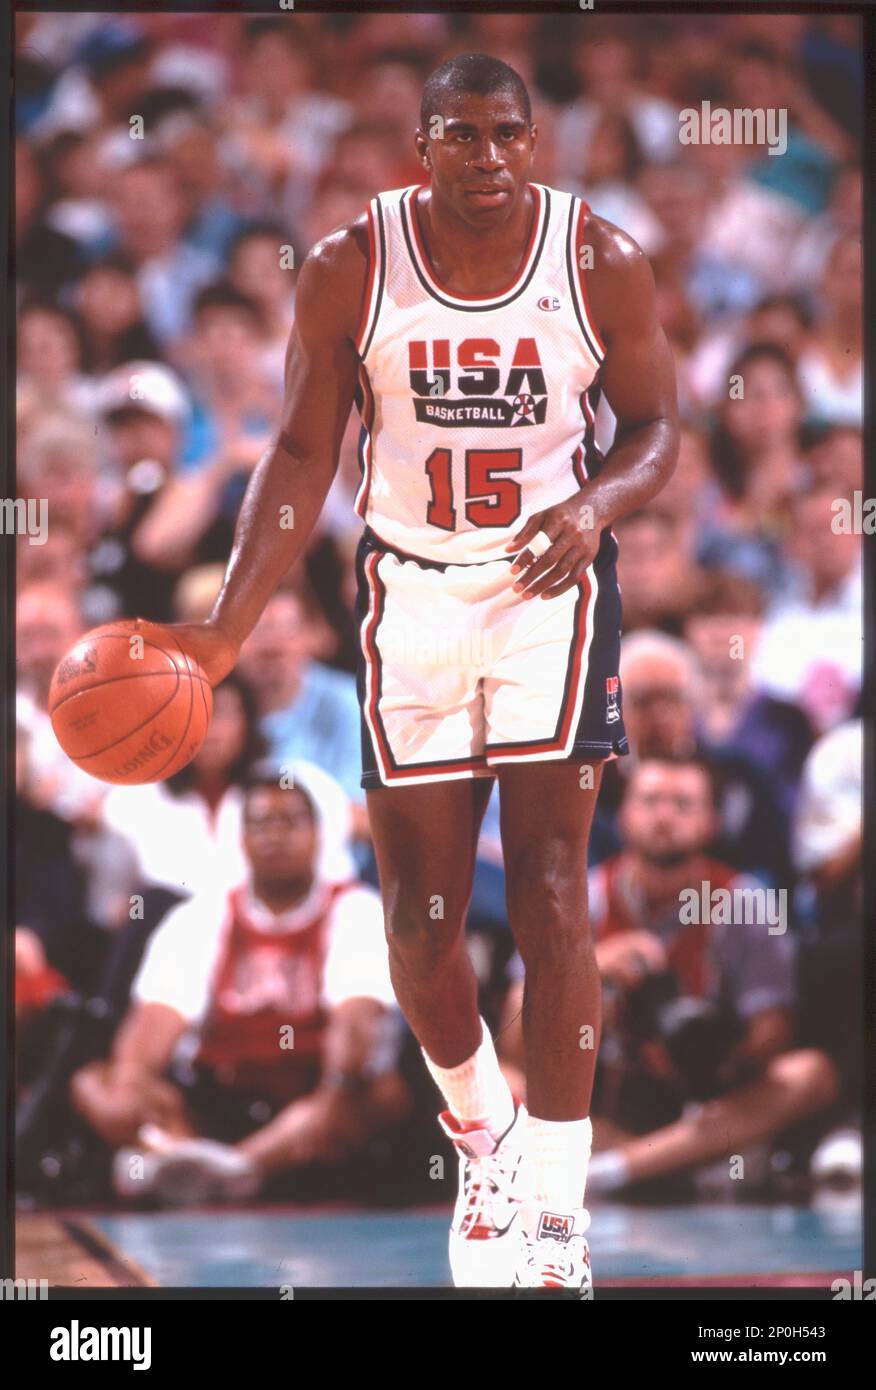 1992: Magic Johnson of Team USA, the Dream Team, dribbles the ball during  the men's basketball competition at the 1992 Summer Olympics in Barcelona,  Spain. (Photo by Icon Sportswire) (Icon Sportswire via